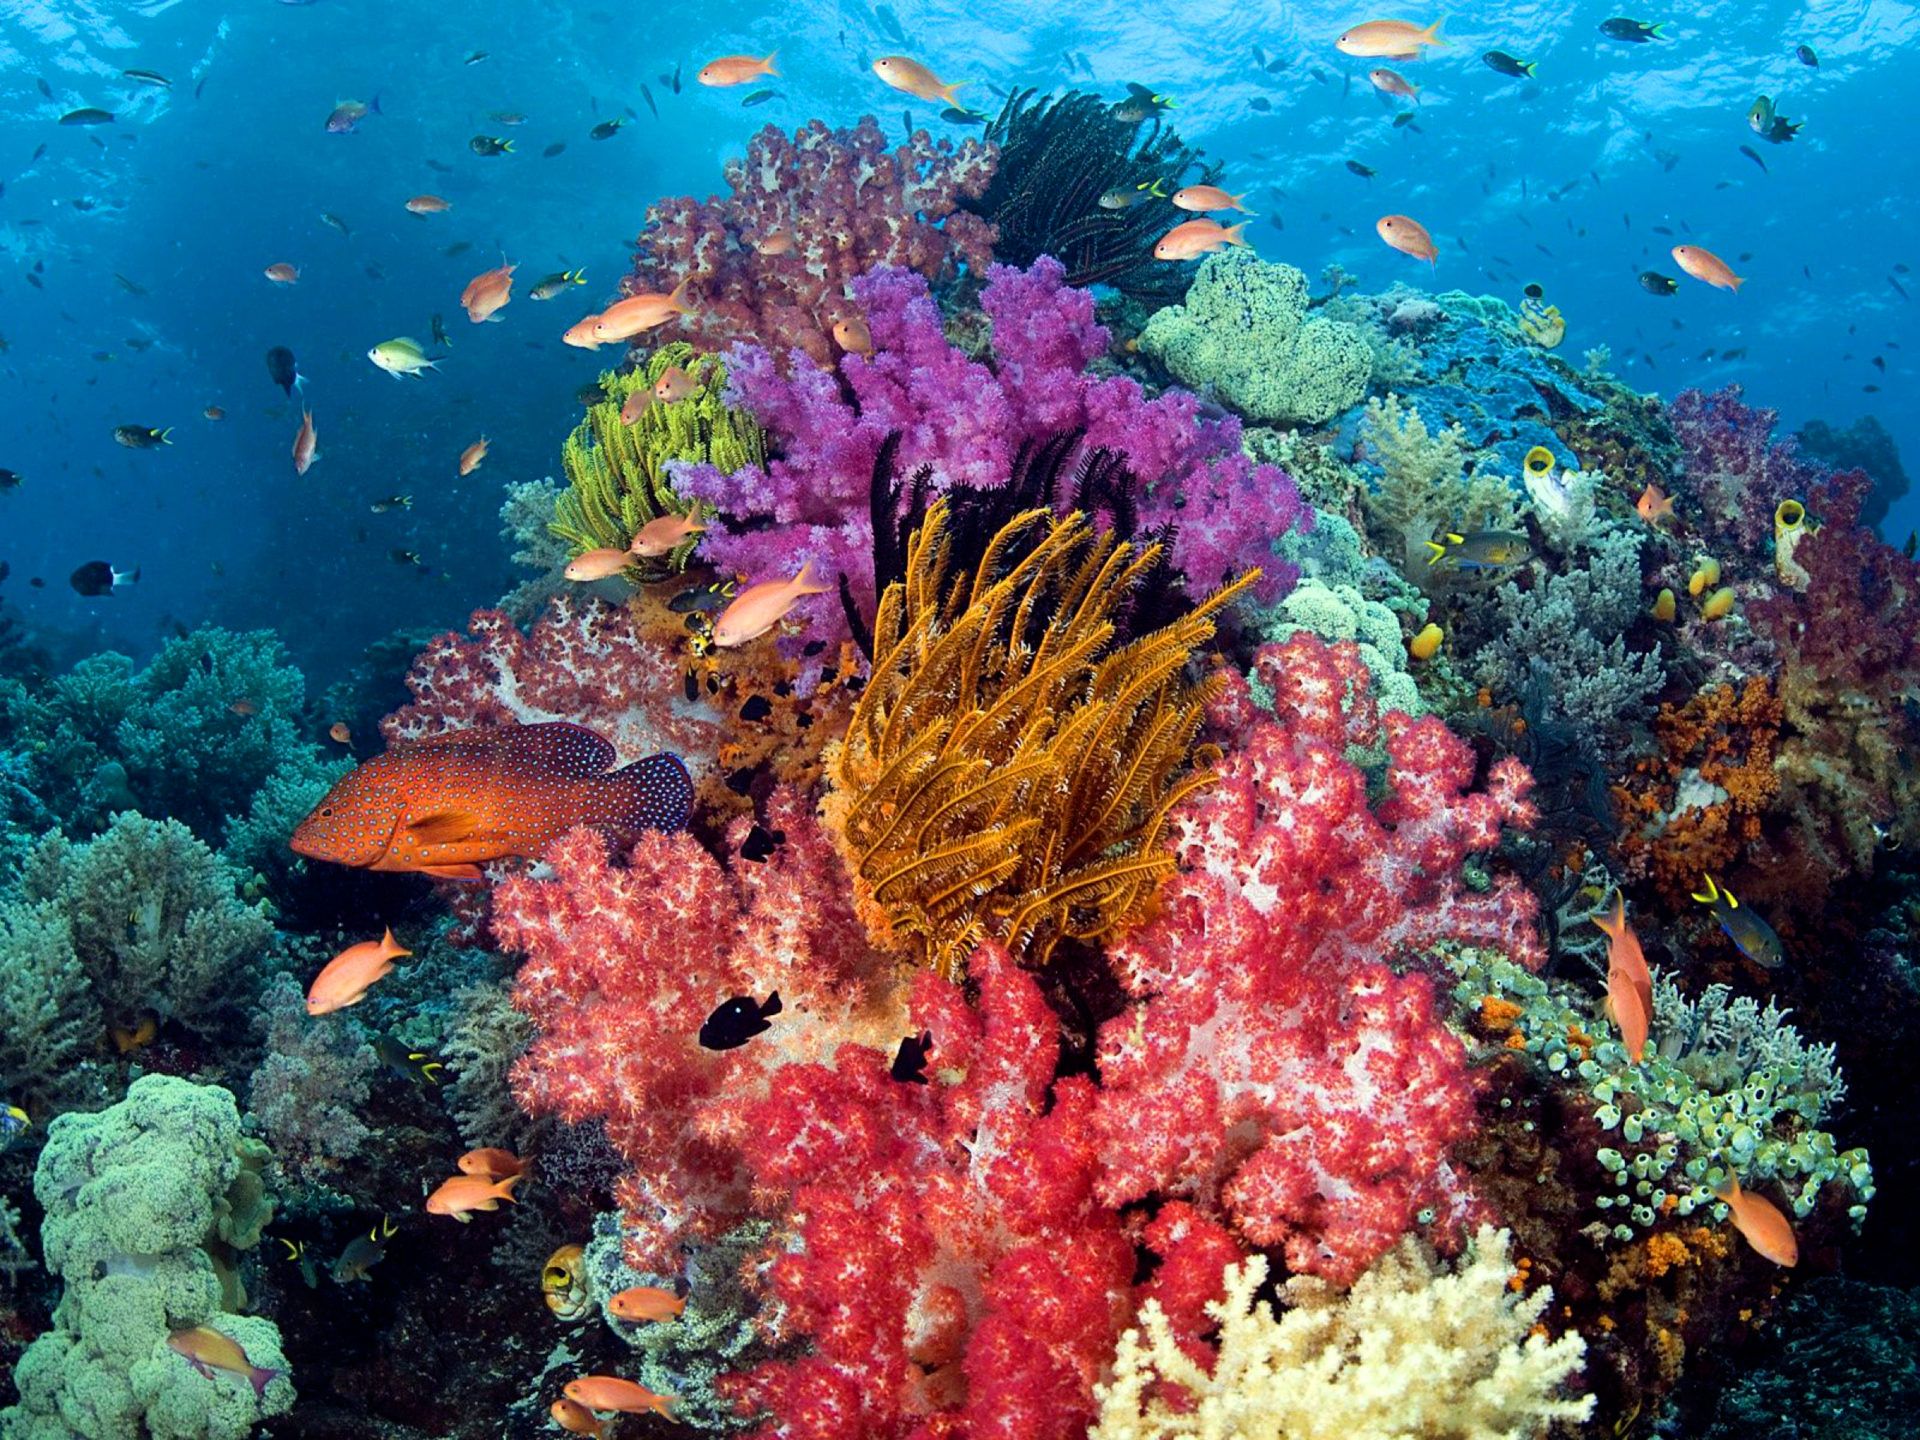 Ocean Seabed, Coral With Sumptuous Colors, Exotic Tropical Fish Underwater Fauna Wallpaper HD Widesreen : Wallpaper13.com